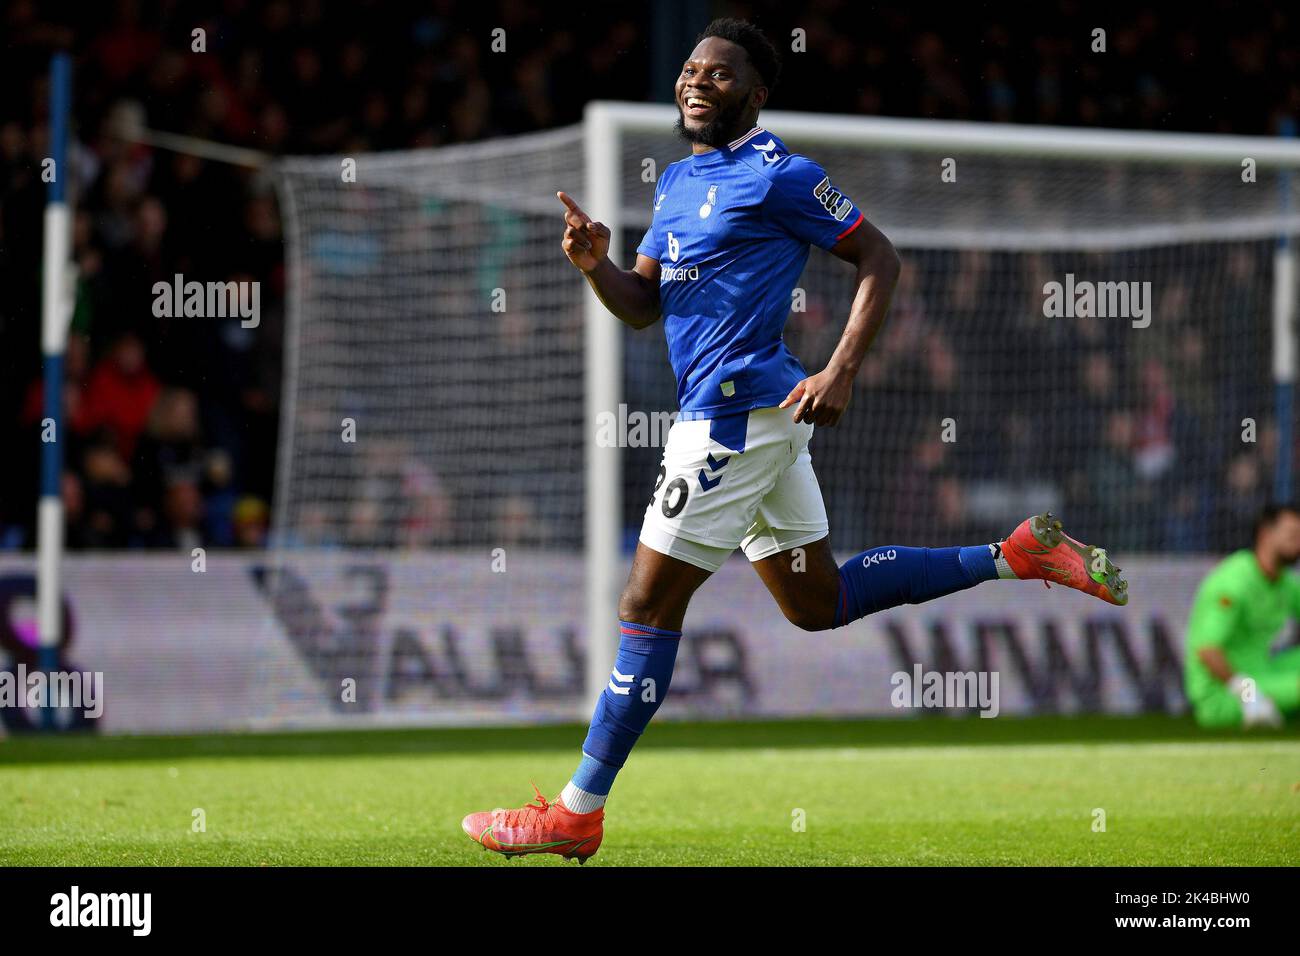 Oldham, UK. 1st October 2022during the Vanarama National League match between Oldham Athletic and Wrexham at Boundary Park, Oldham on Saturday 1st October 2022Mike Fondop-Talom of Oldham Athletic celebrates scoring his side's first goal of the game during the Vanarama National League match between Oldham Athletic and Wrexham at Boundary Park, Oldham on Saturday 1st October 2022. Credit: MI News & Sport /Alamy Live News Stock Photo